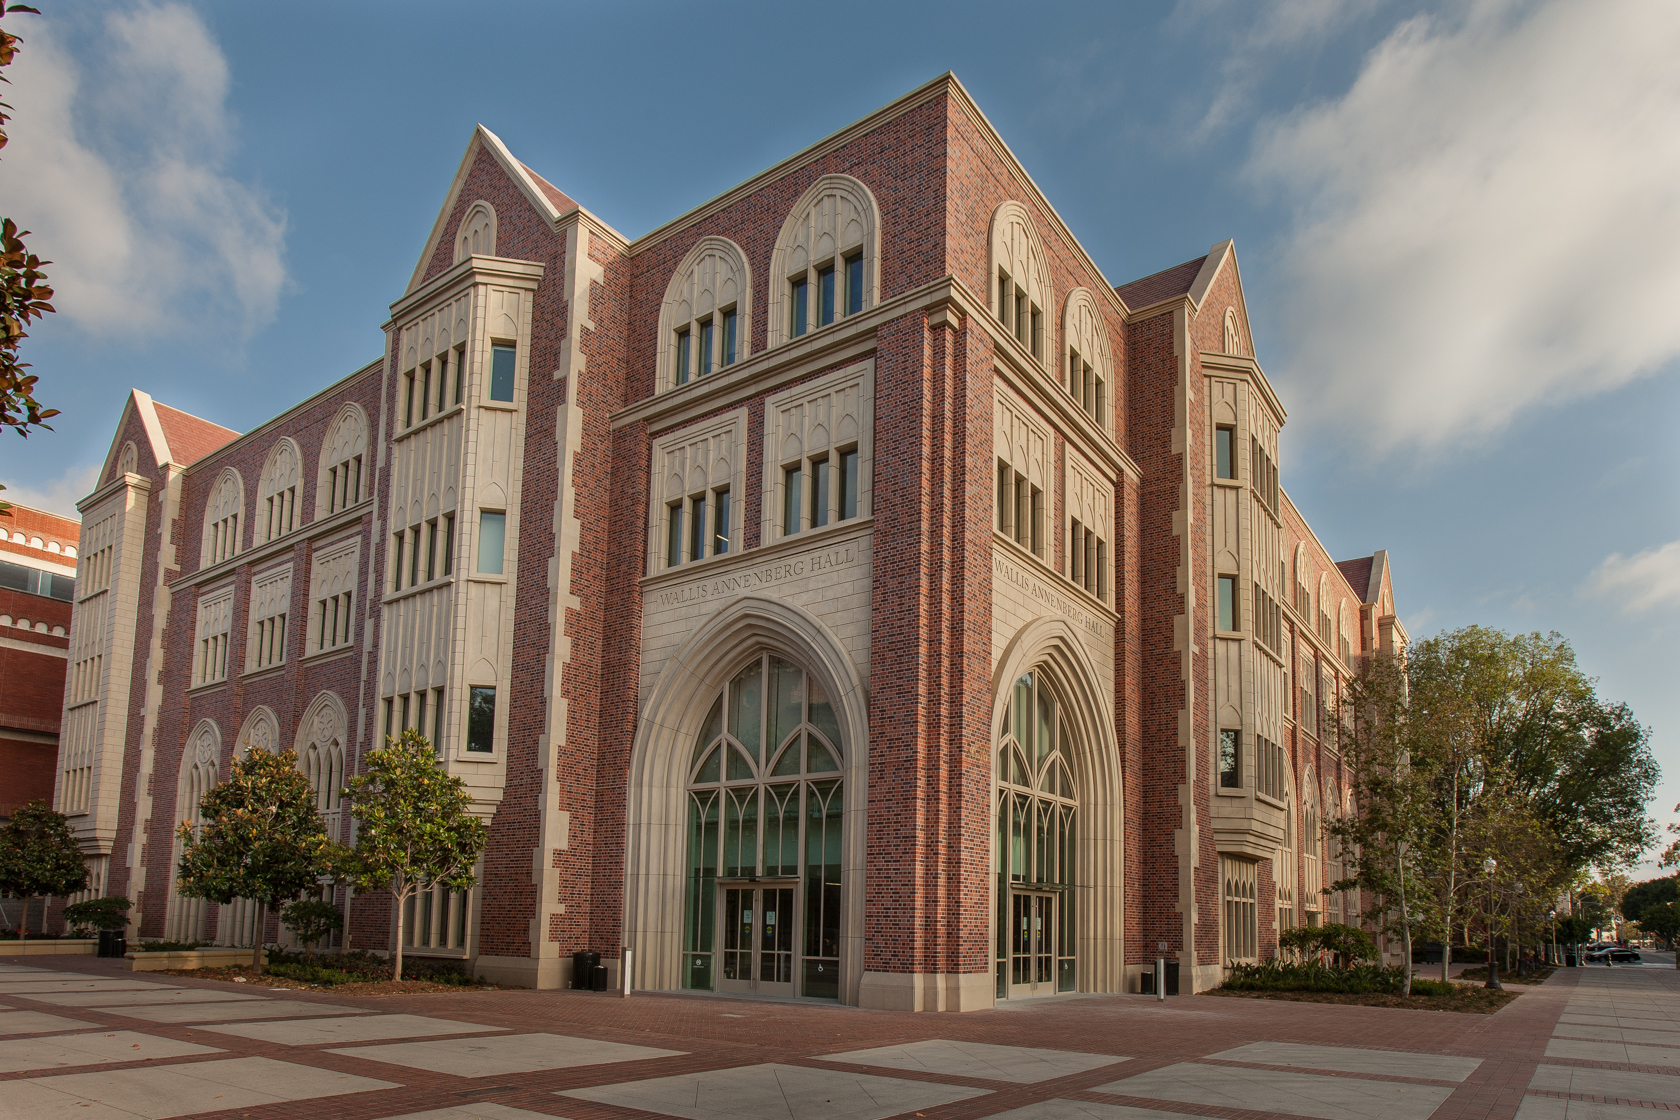 About USC Annenberg | USC Annenberg School for Communication and Journalism